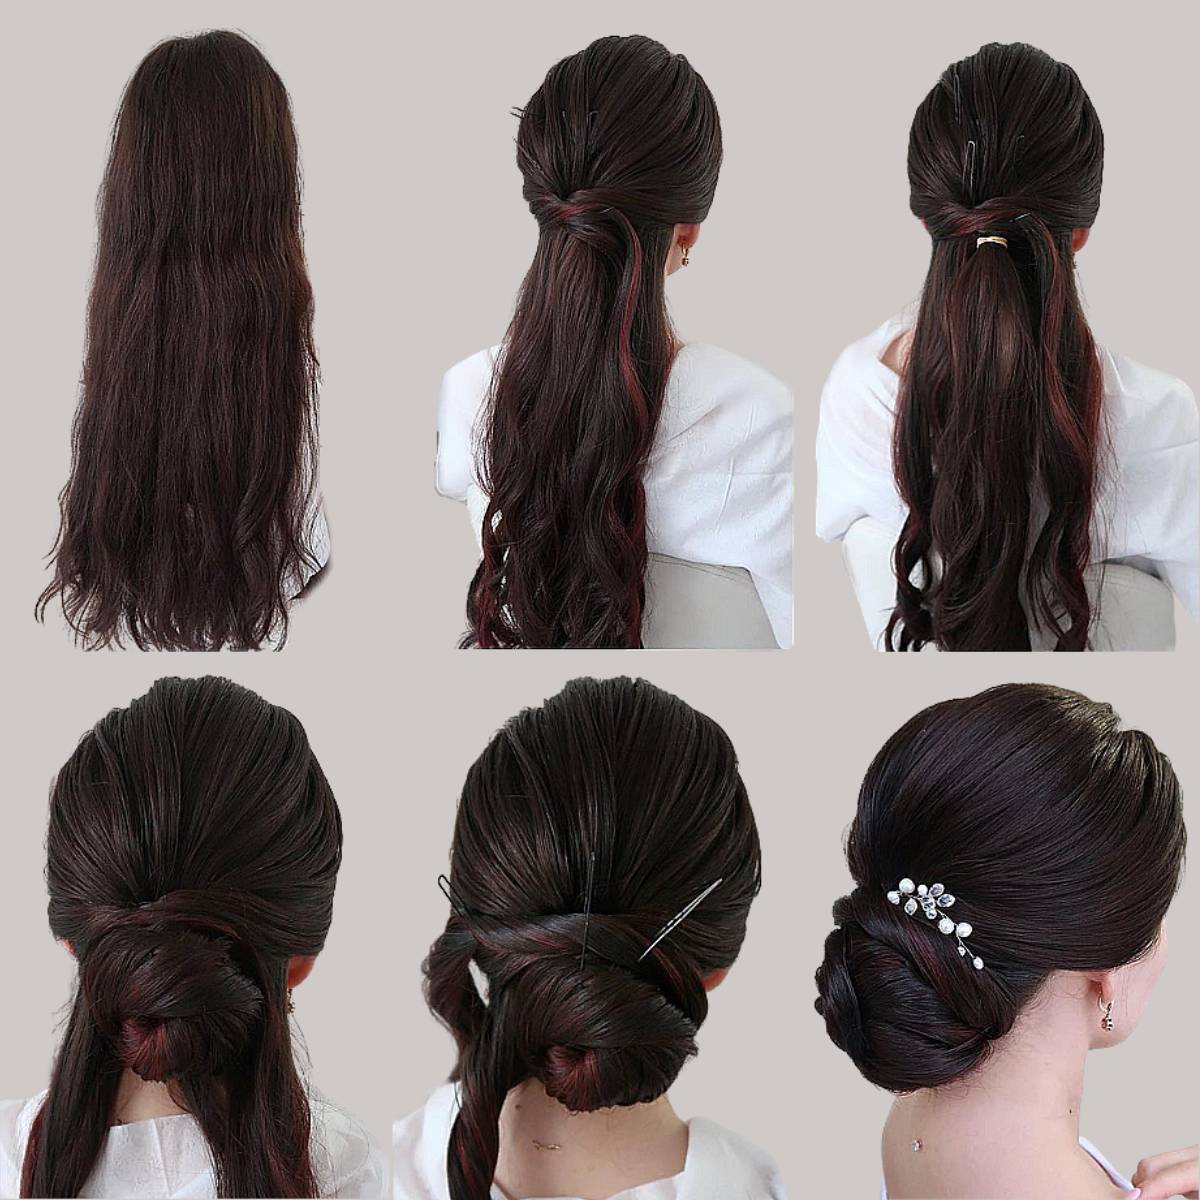 3 MOST LOVED HAIRSTYLES FOR EVERY WEDDING FUNCTION